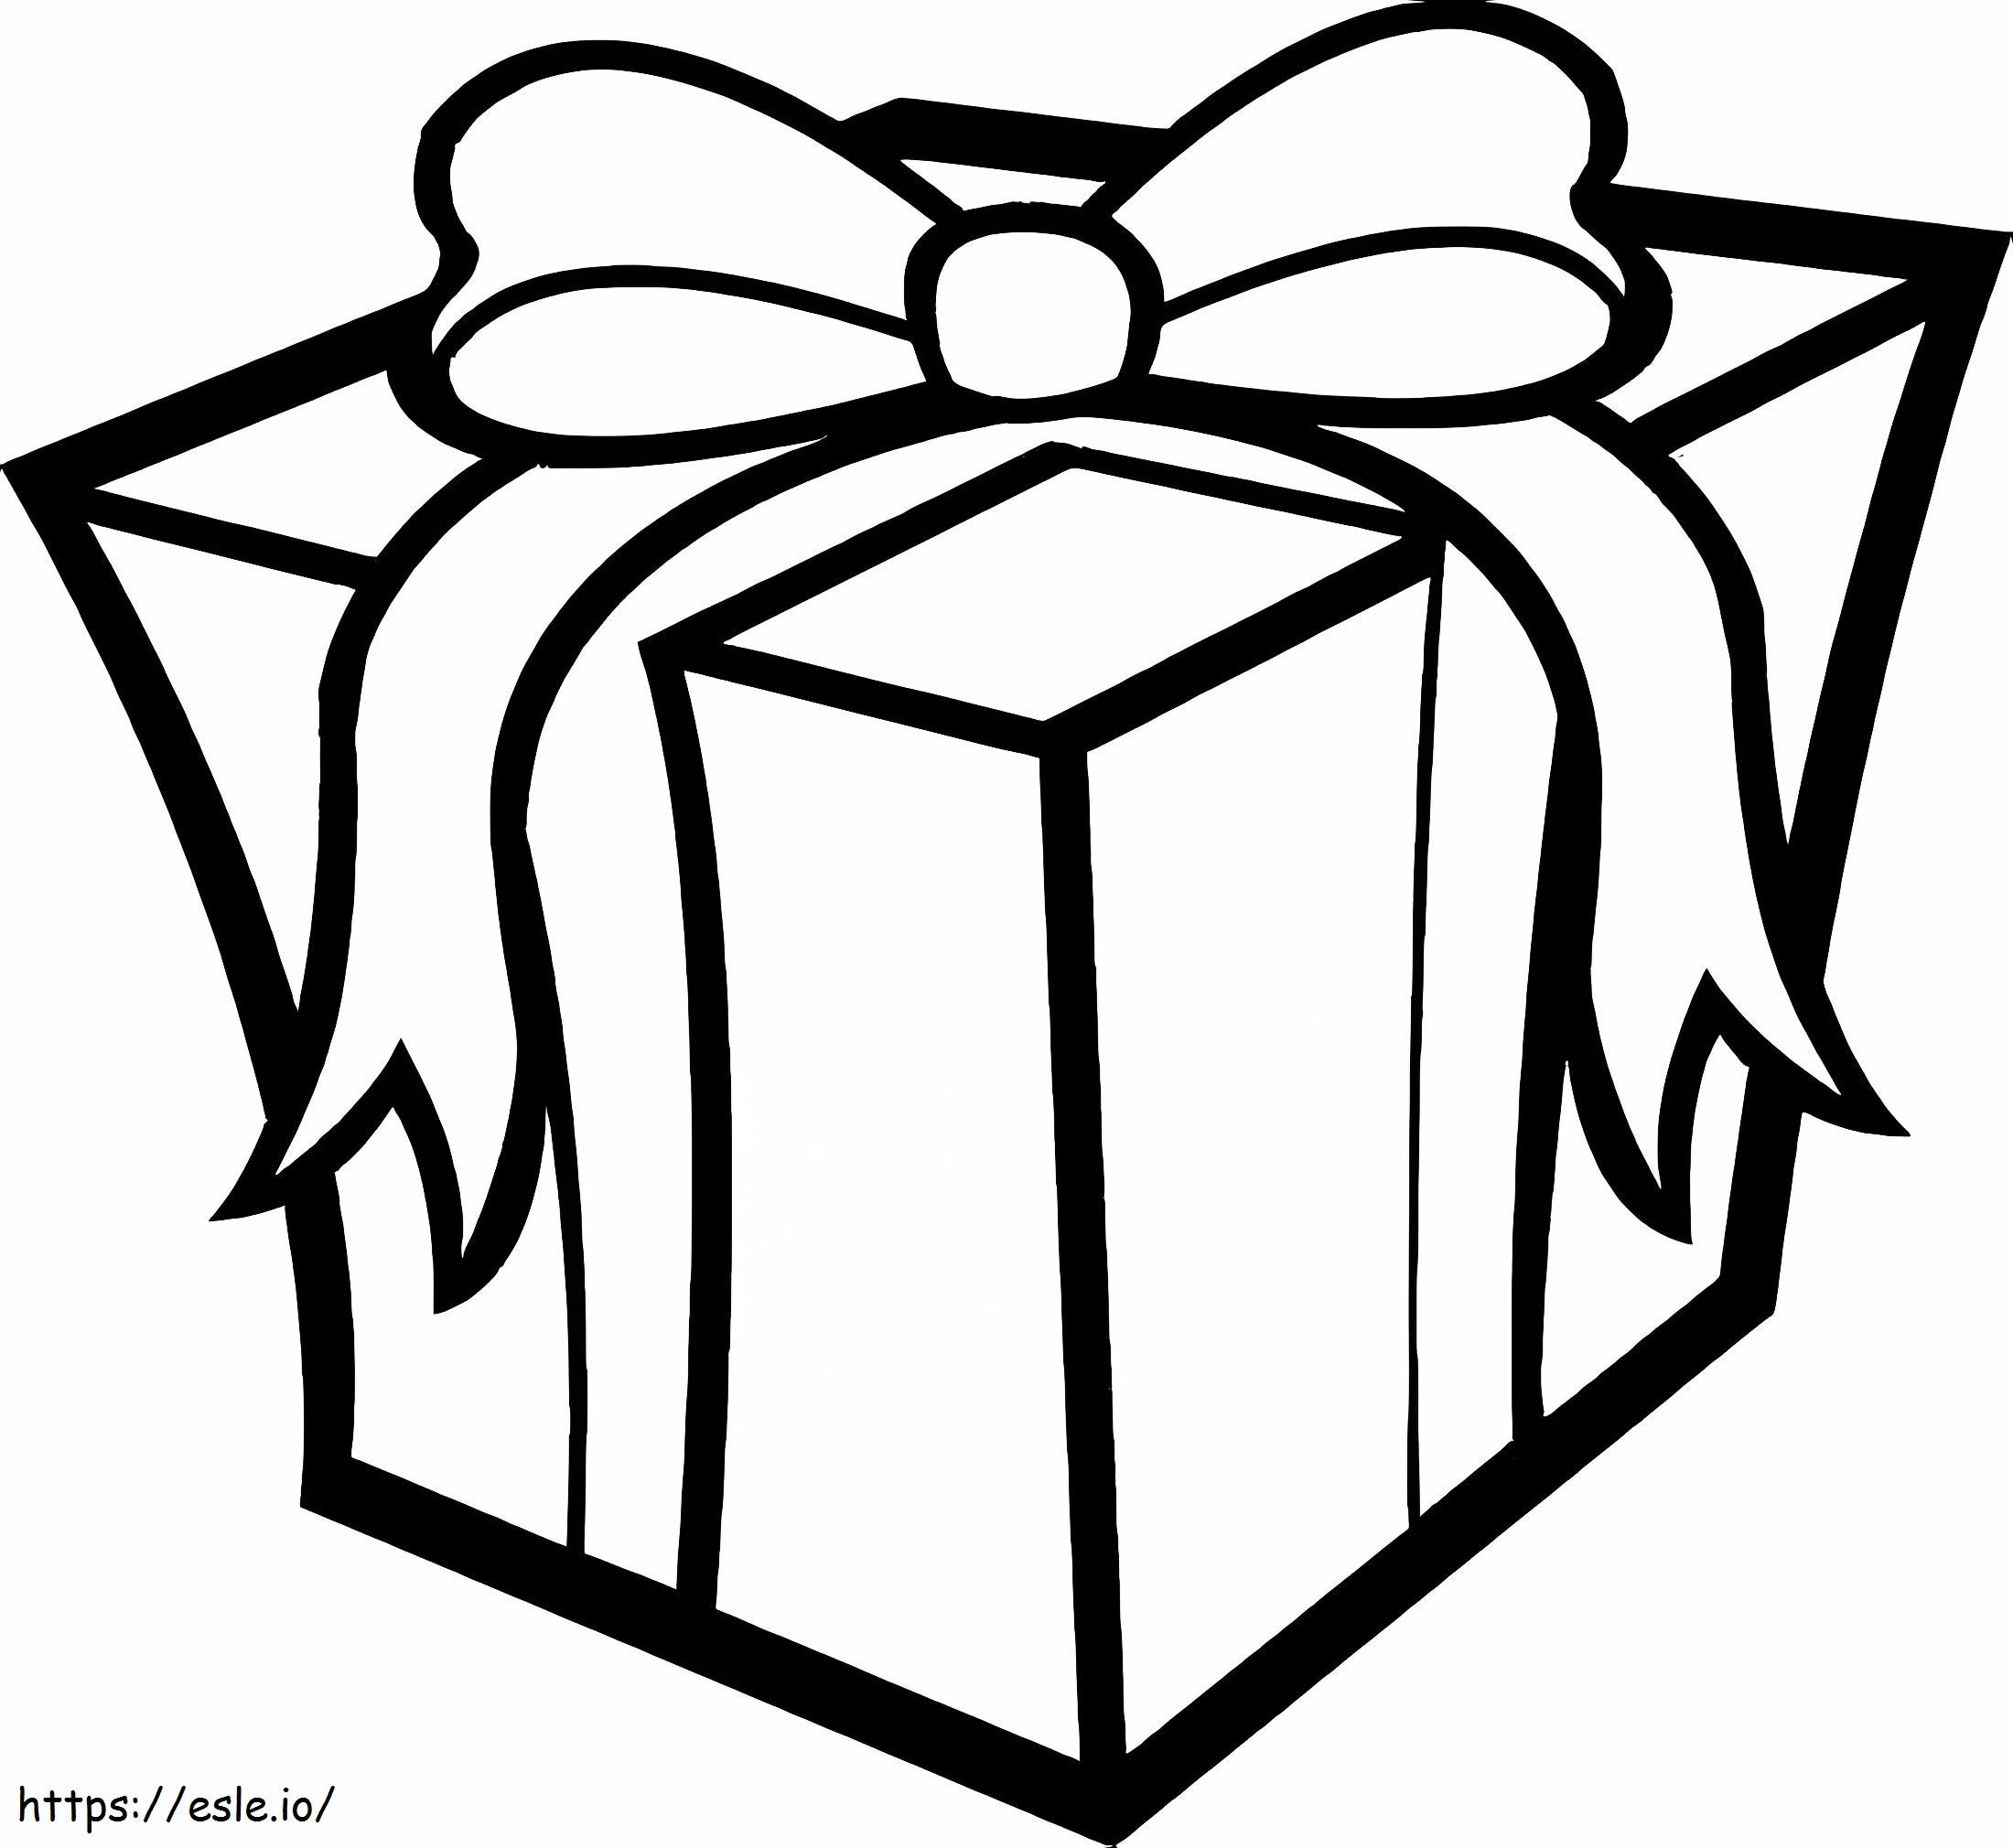 Basic Gift Box coloring page